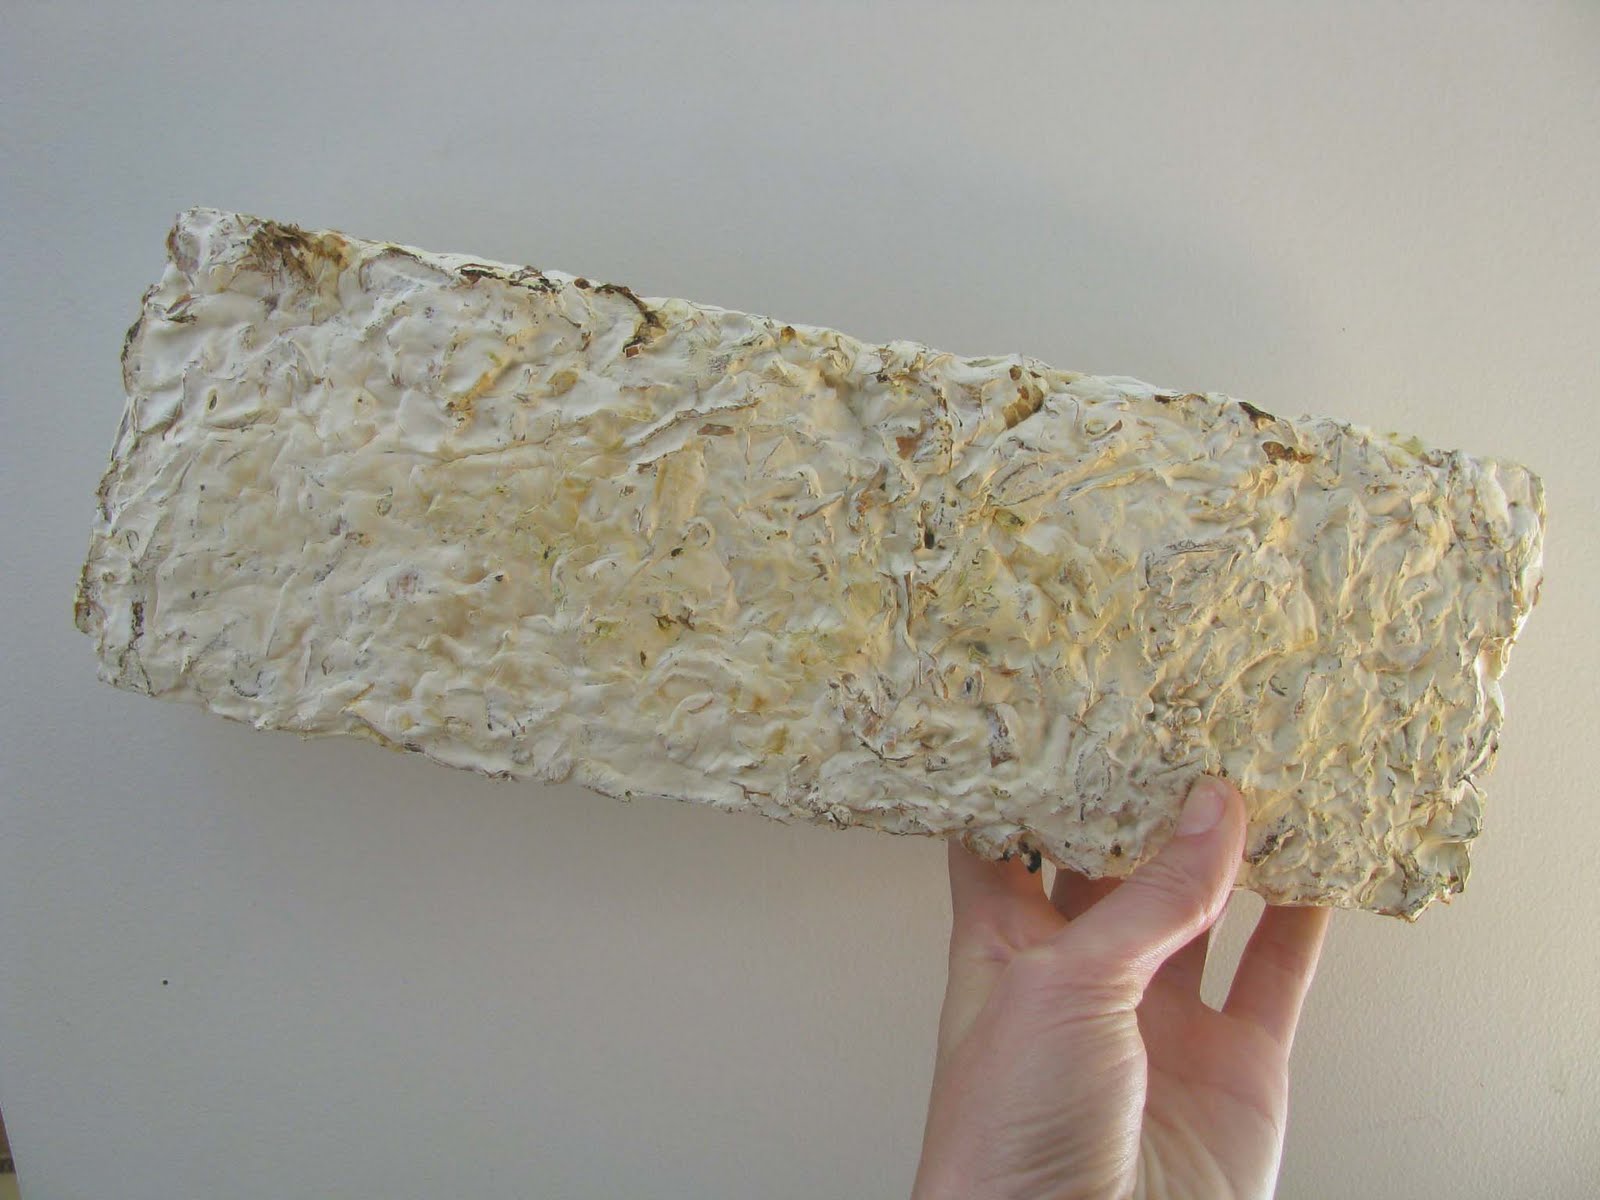 Biomimicry fungi to grow packaging material